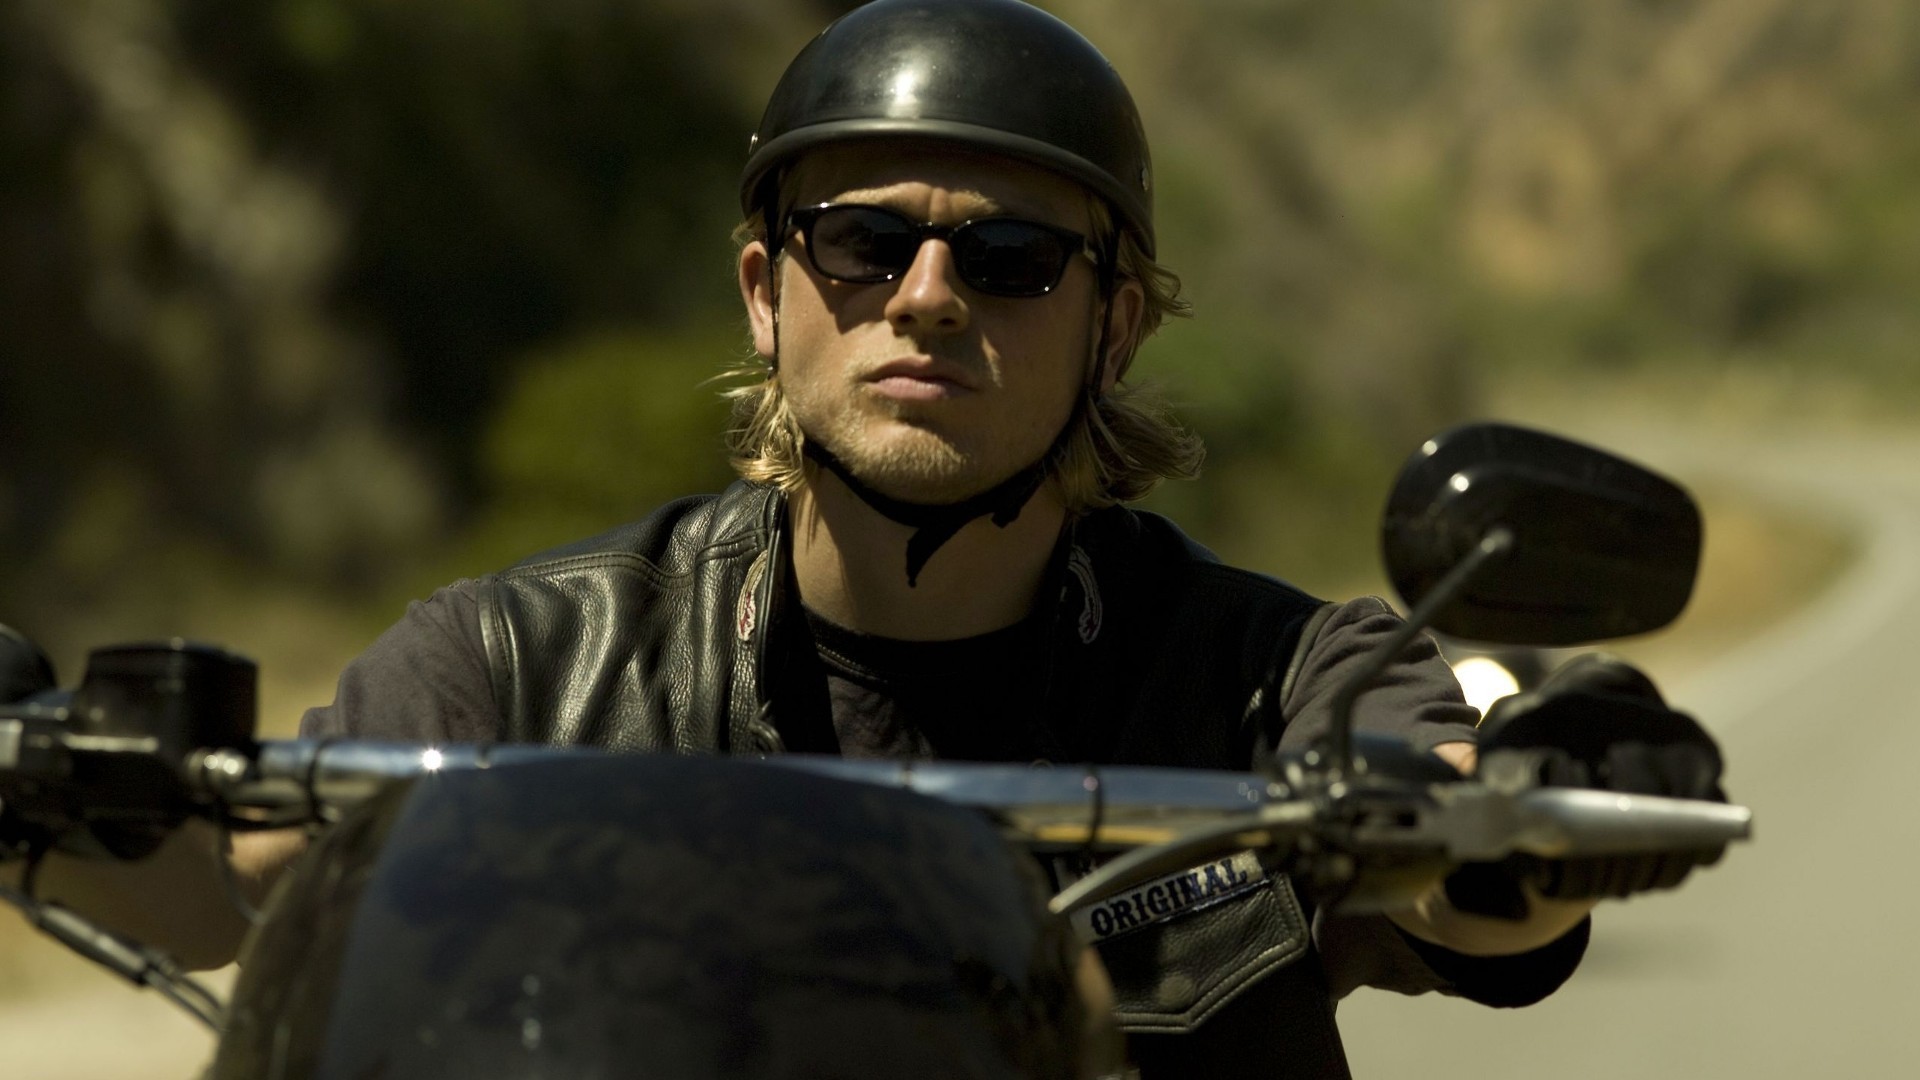 TV Show Sons Of Anarchy 1920x1080